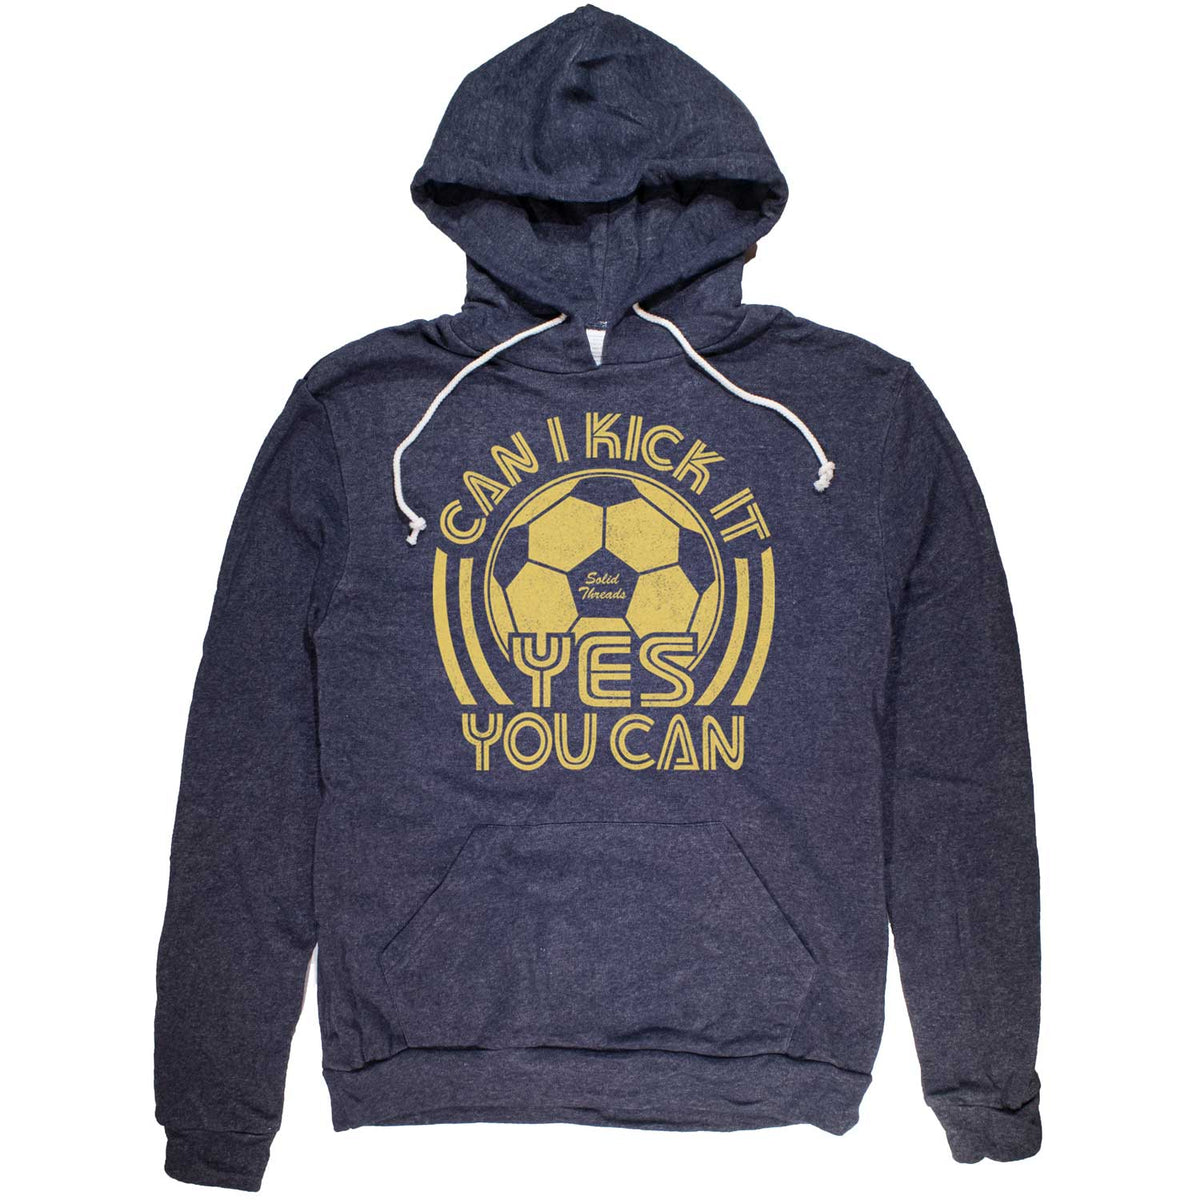 Unisex Can I Kick It, Yes You Can Vintage Graphic Hoodie | Funny Soccer Sweatshirt | Solid Threads